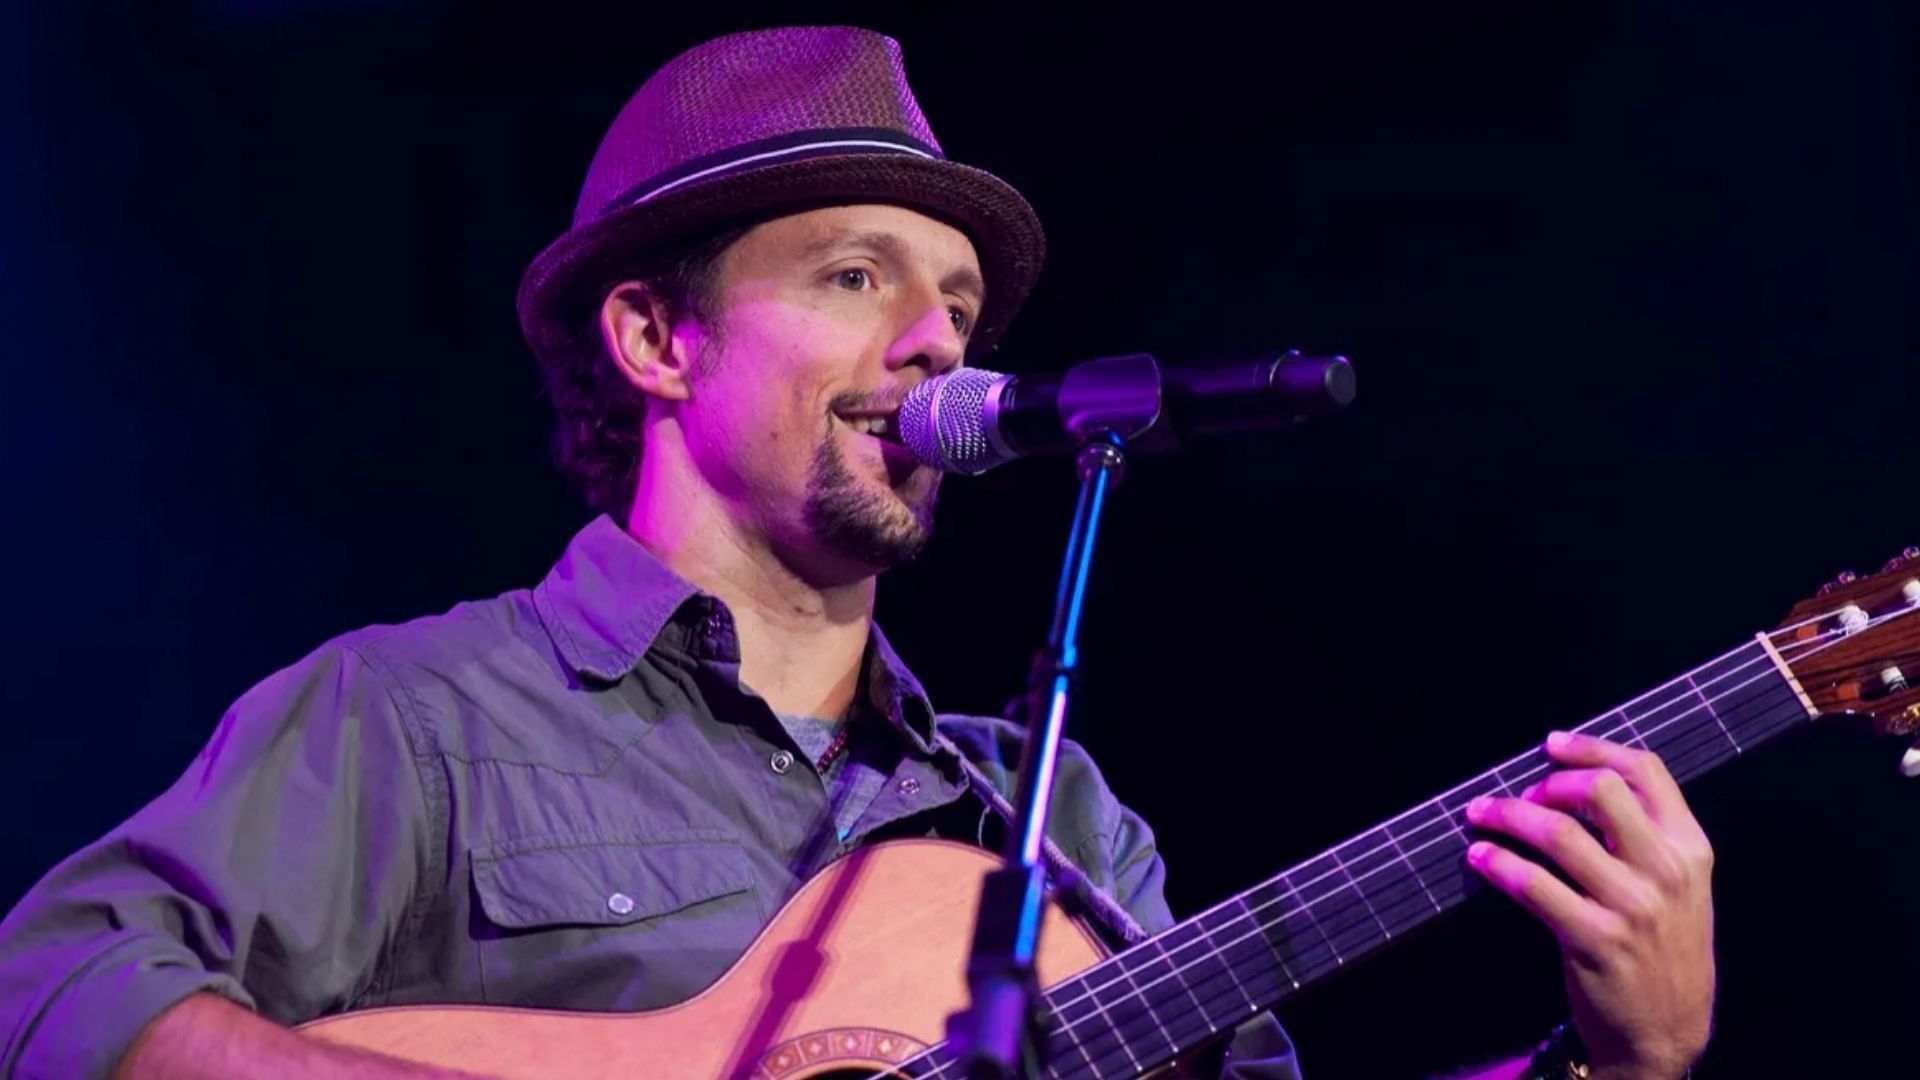 Jason Mraz Tour 2022 tickets Where to buy, dates, price, and more